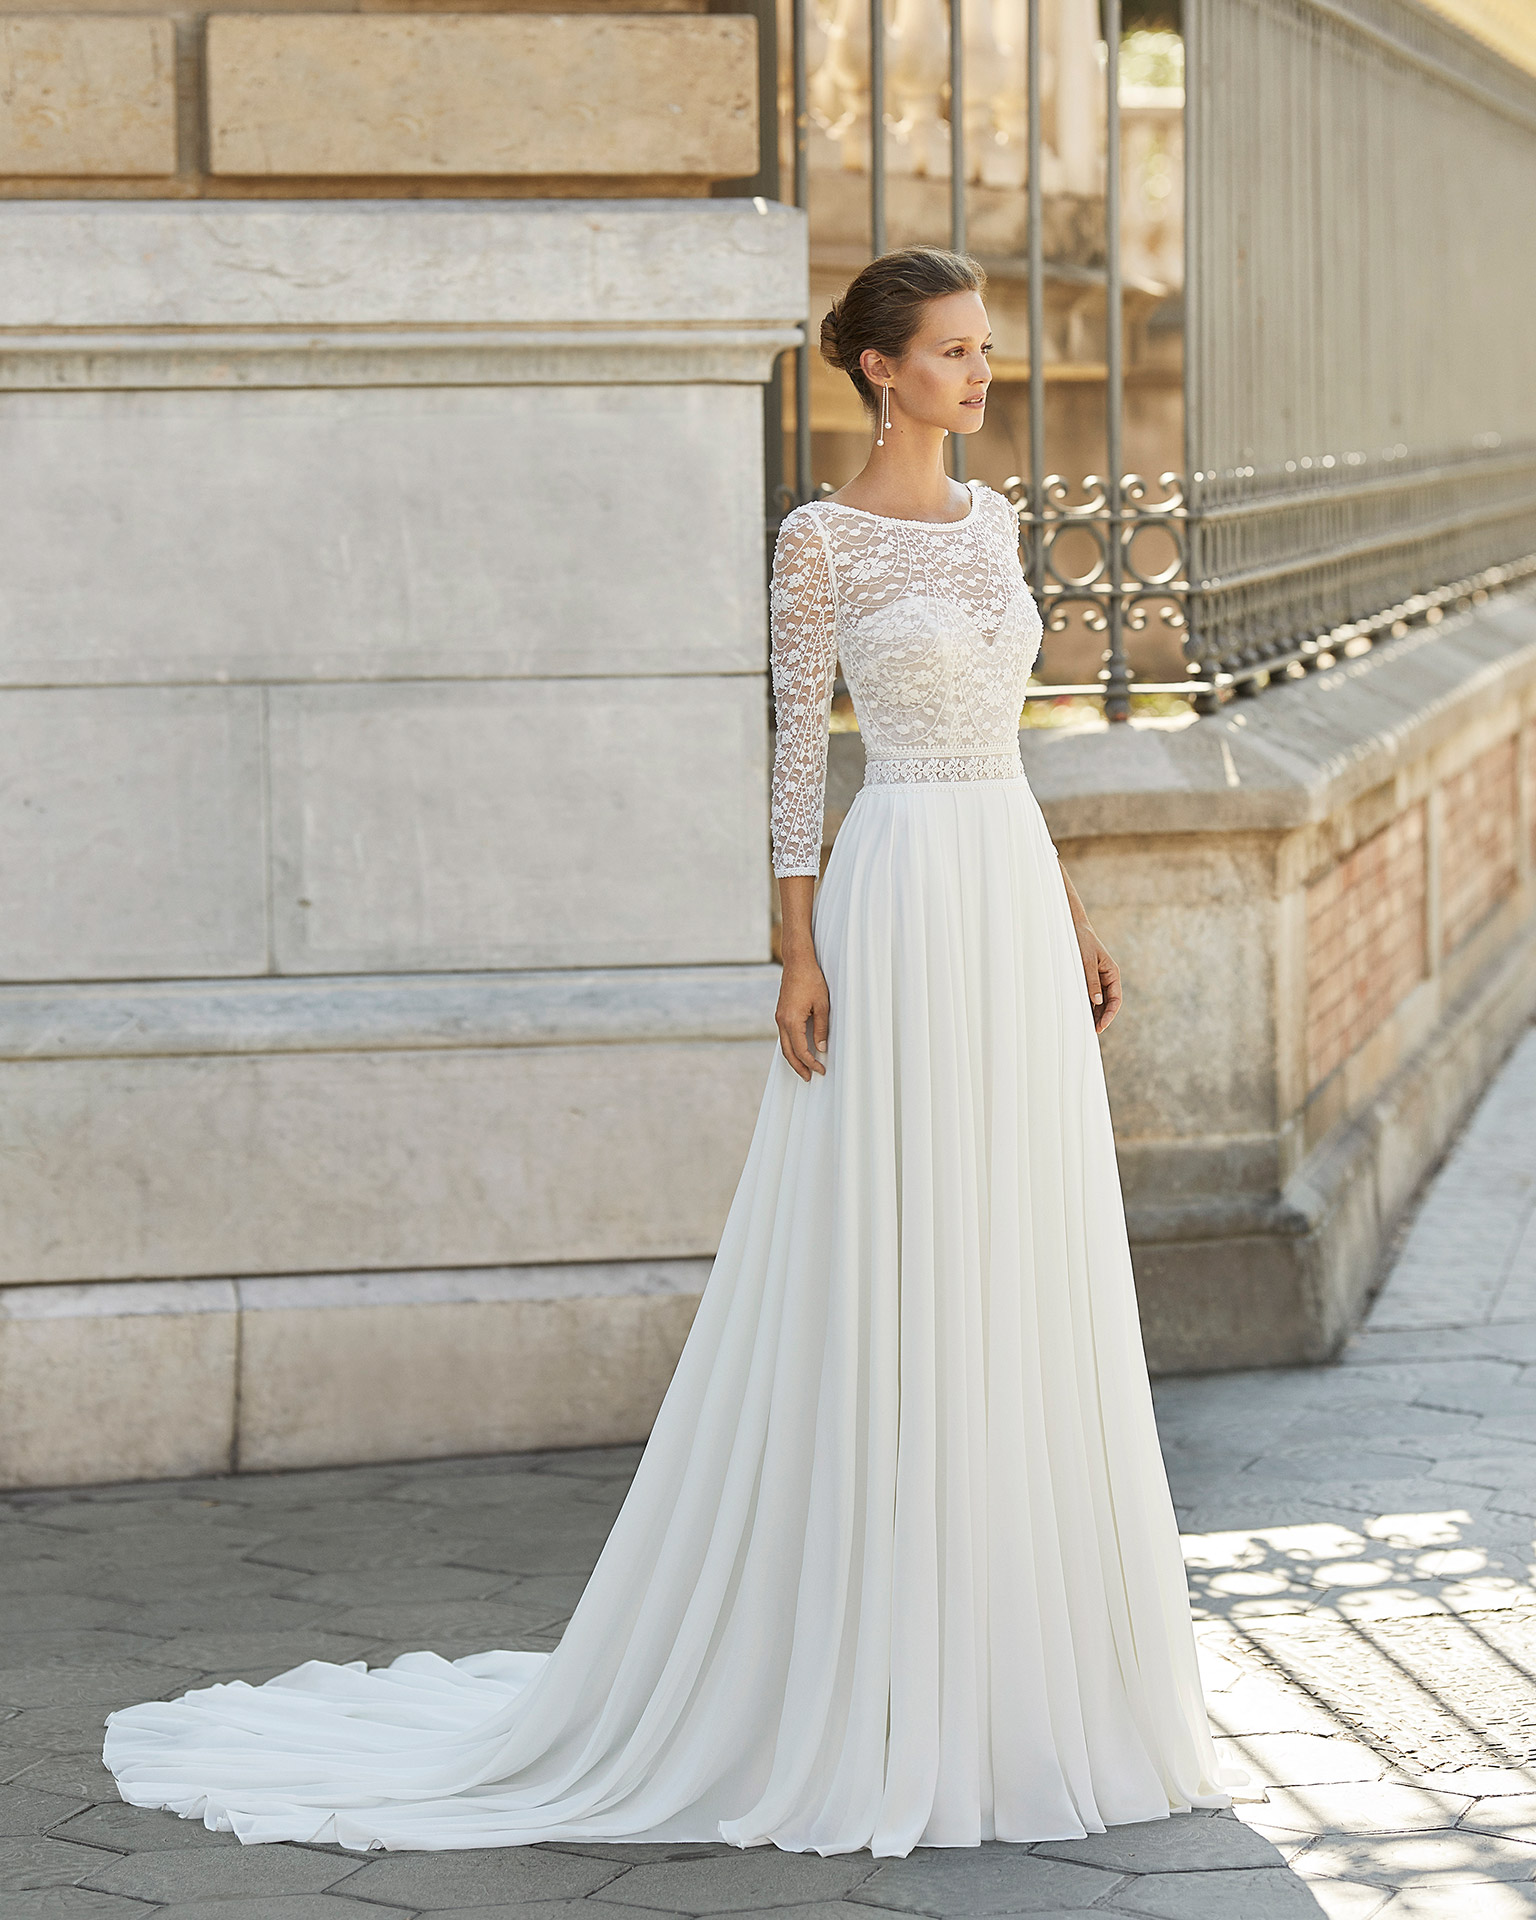 Lightweight wedding dress in georgette and beaded lace. Boat neck, V-back and 3/4-length sleeves. 2022  Collection.